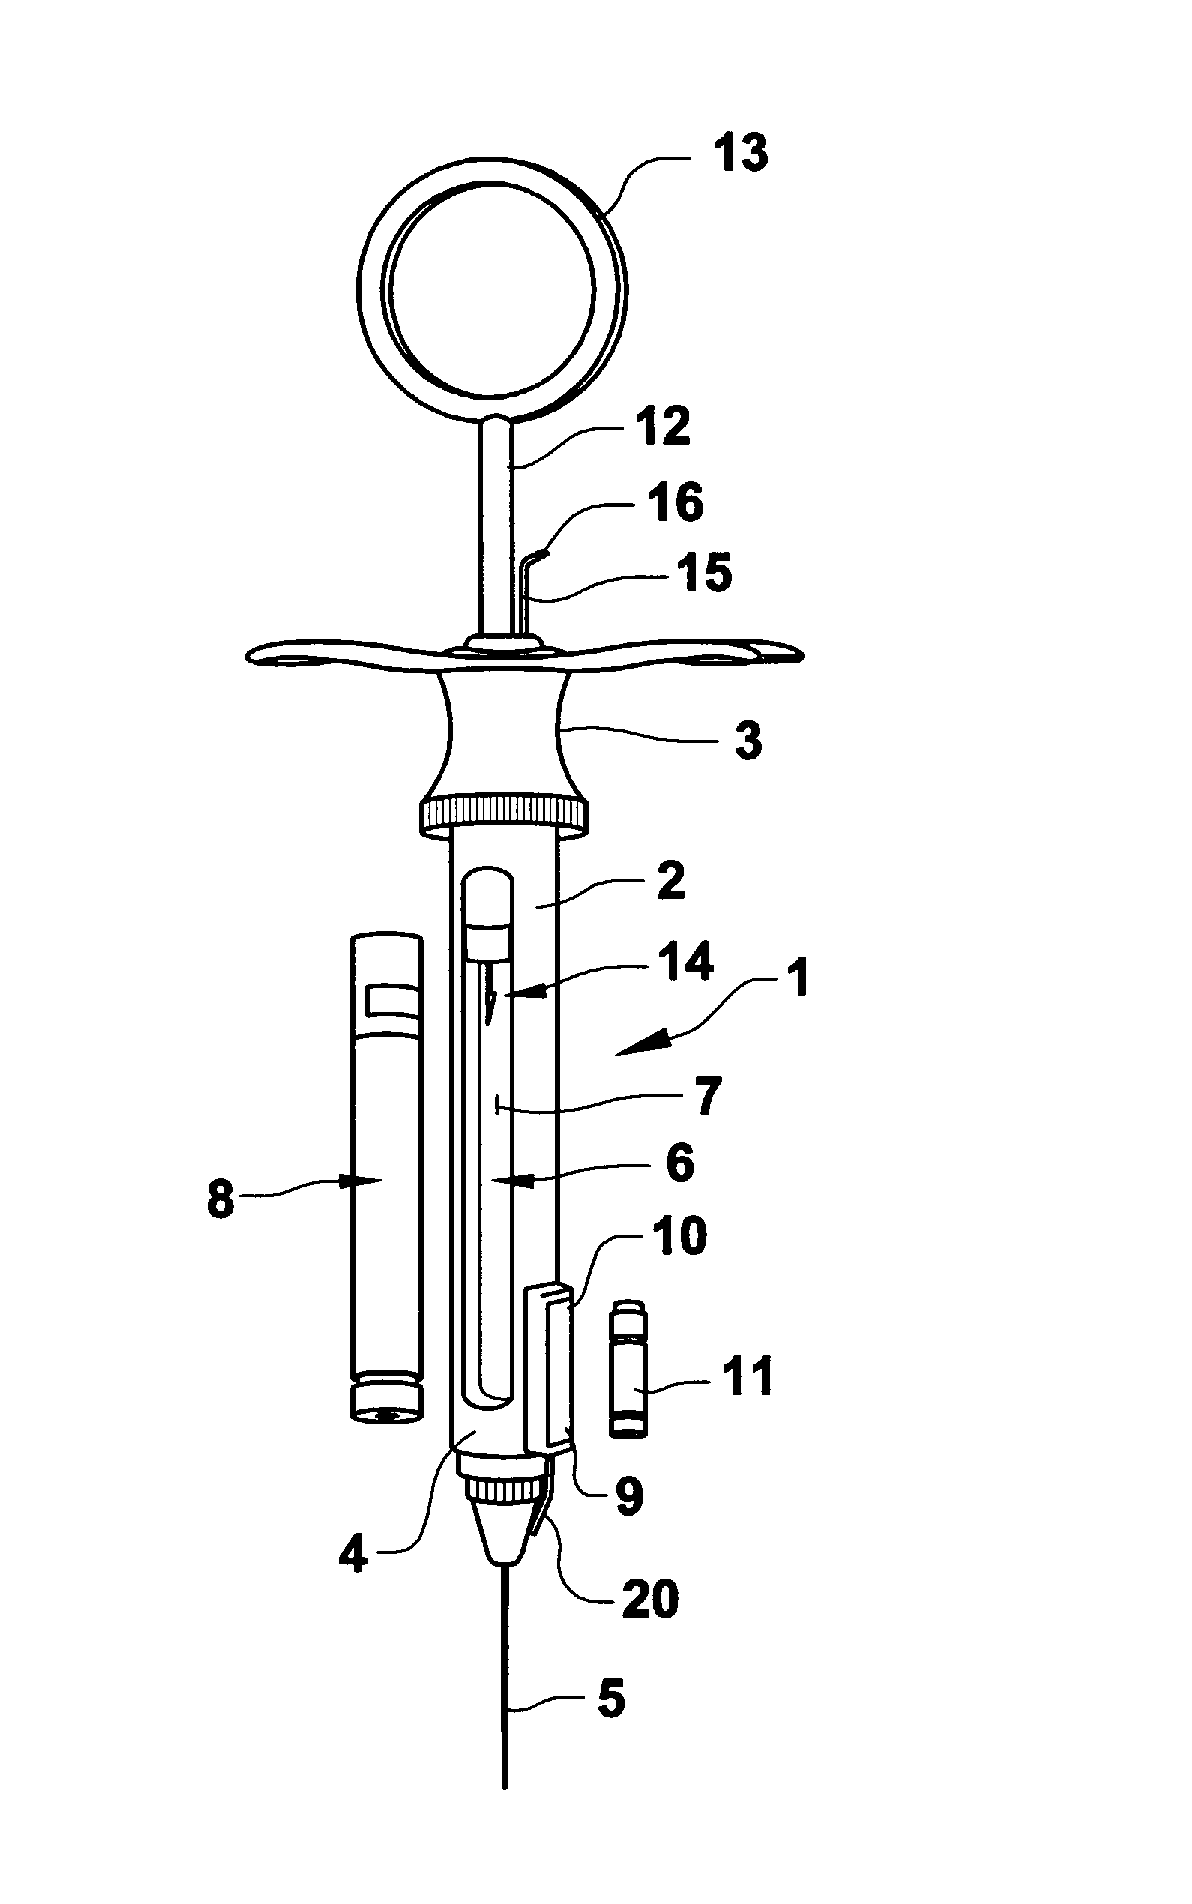 Method and apparatus for applying an anesthetic and bactericide